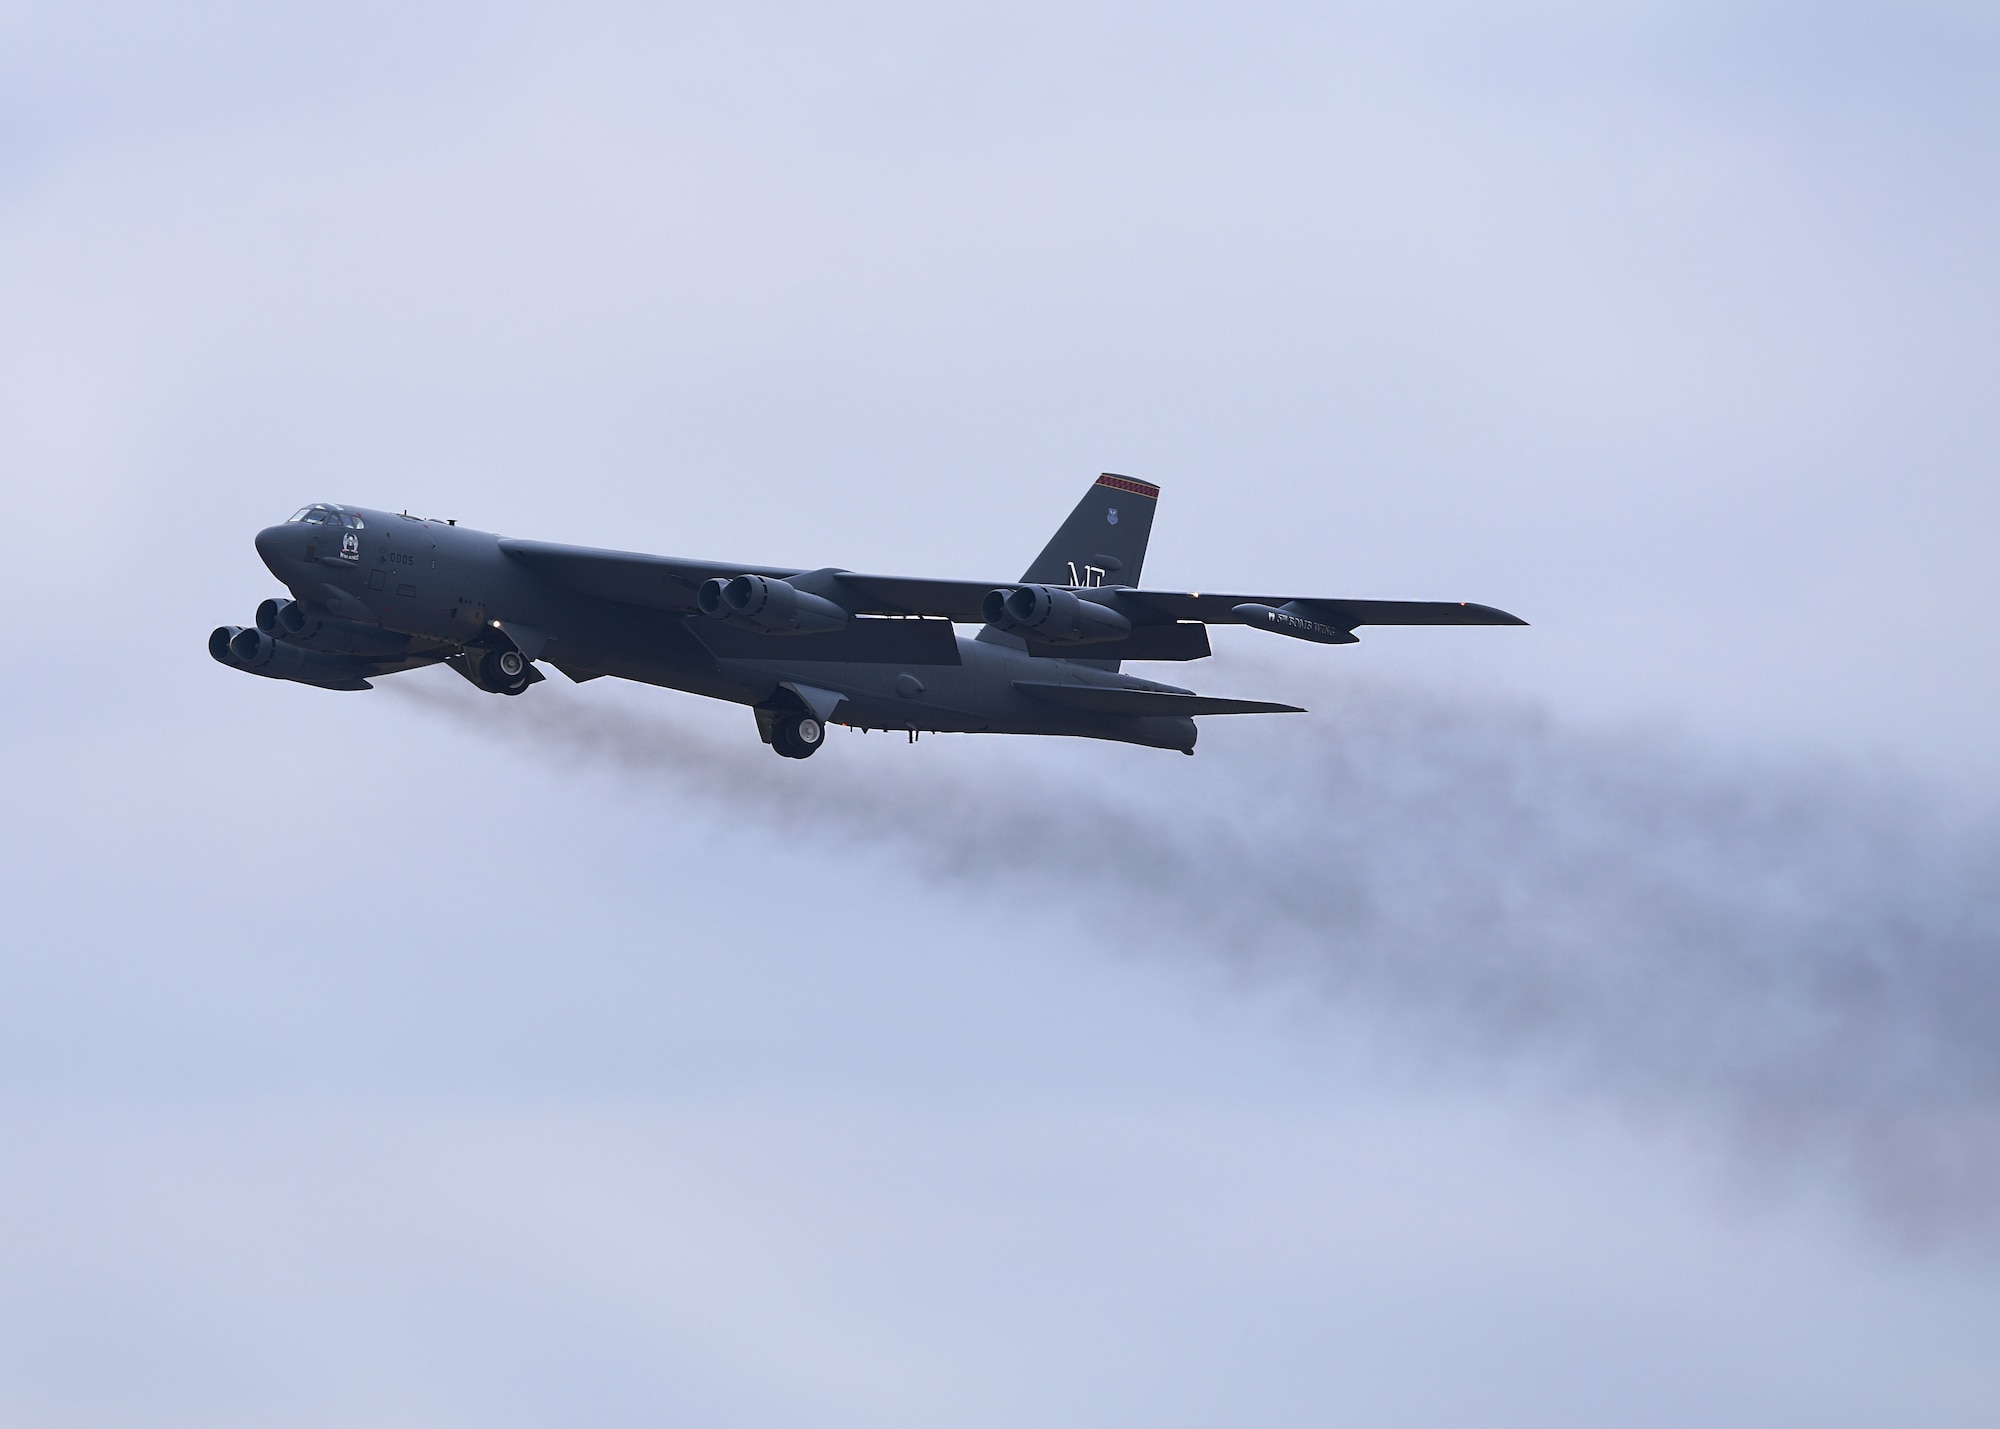 A B-52H Stratofortress takes off during Global Thunder 19 at Minot Air Force Base, N.D., Nov. 4, 2018. Global Thunder is a U.S. Strategic Command (USSTRATCOM) exercise designed to provide training opportunities to test and validate command, control and operational procedures. The training is based on a notional scenario developed to drive execution of USSTRATCOM and component forces&#39; ability to support the geographic combatant commands, deter adversaries and, if necessary, employ forces as directed by the President of the United States. (U.S. Air Force Photo by Airman 1st Class Dillon J. Audit)